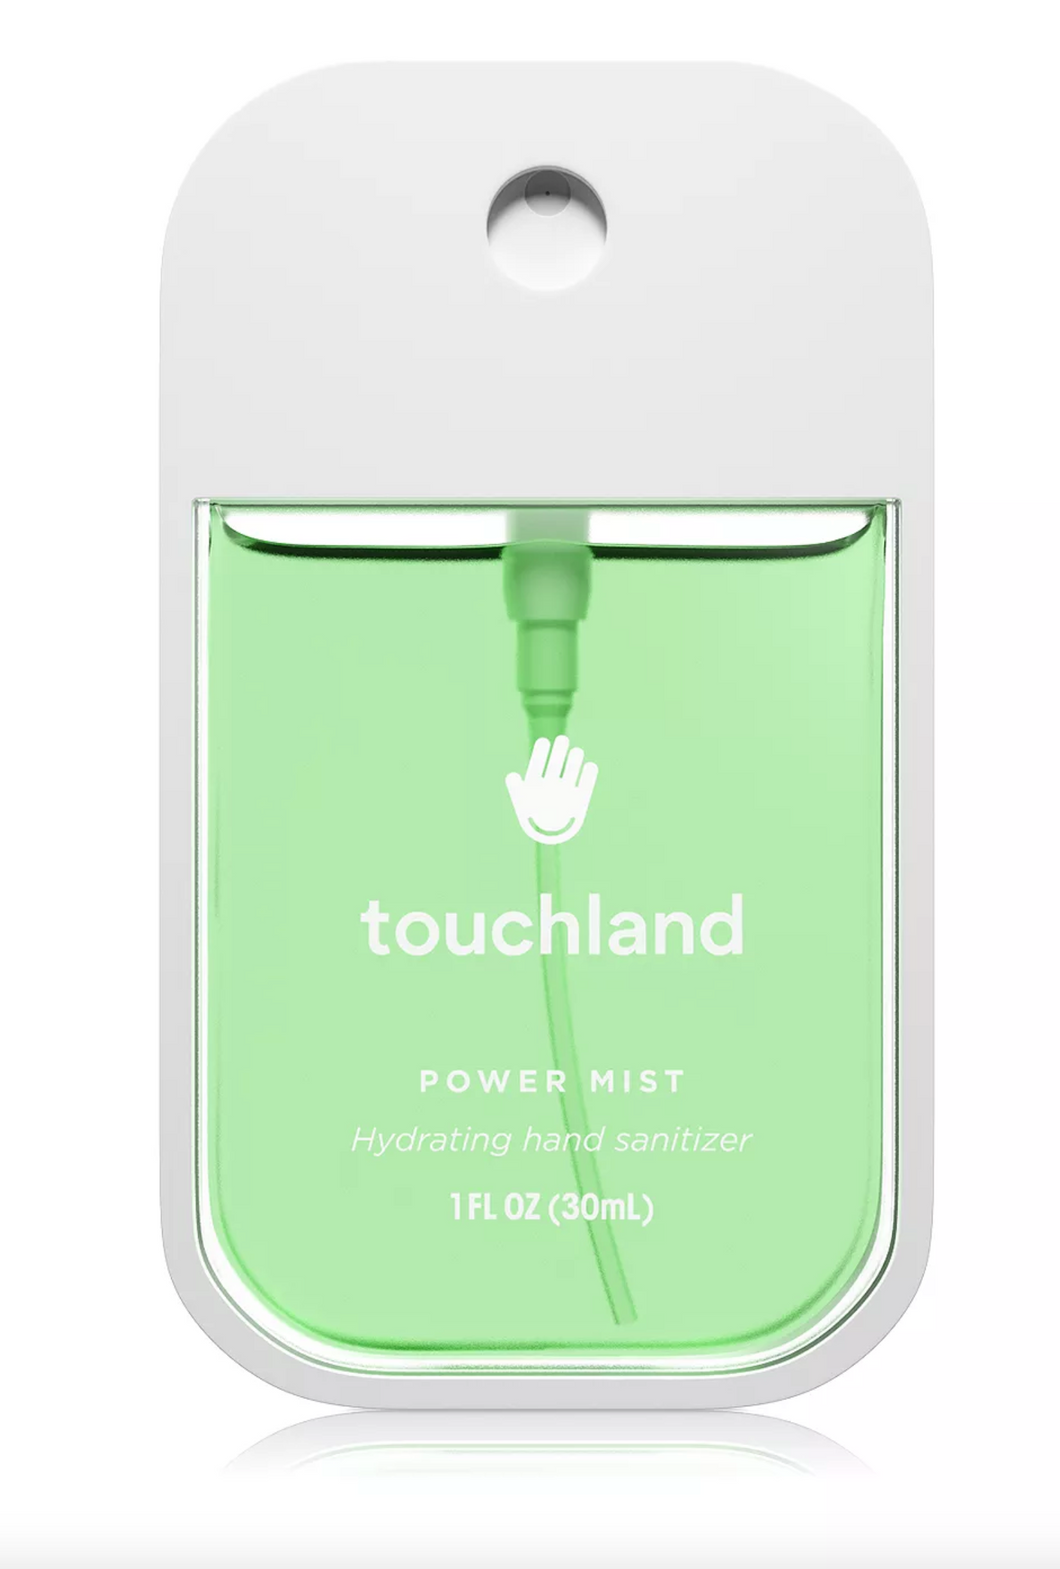 Touchland Mist Hand Sanitizer – The Amazing Body Store